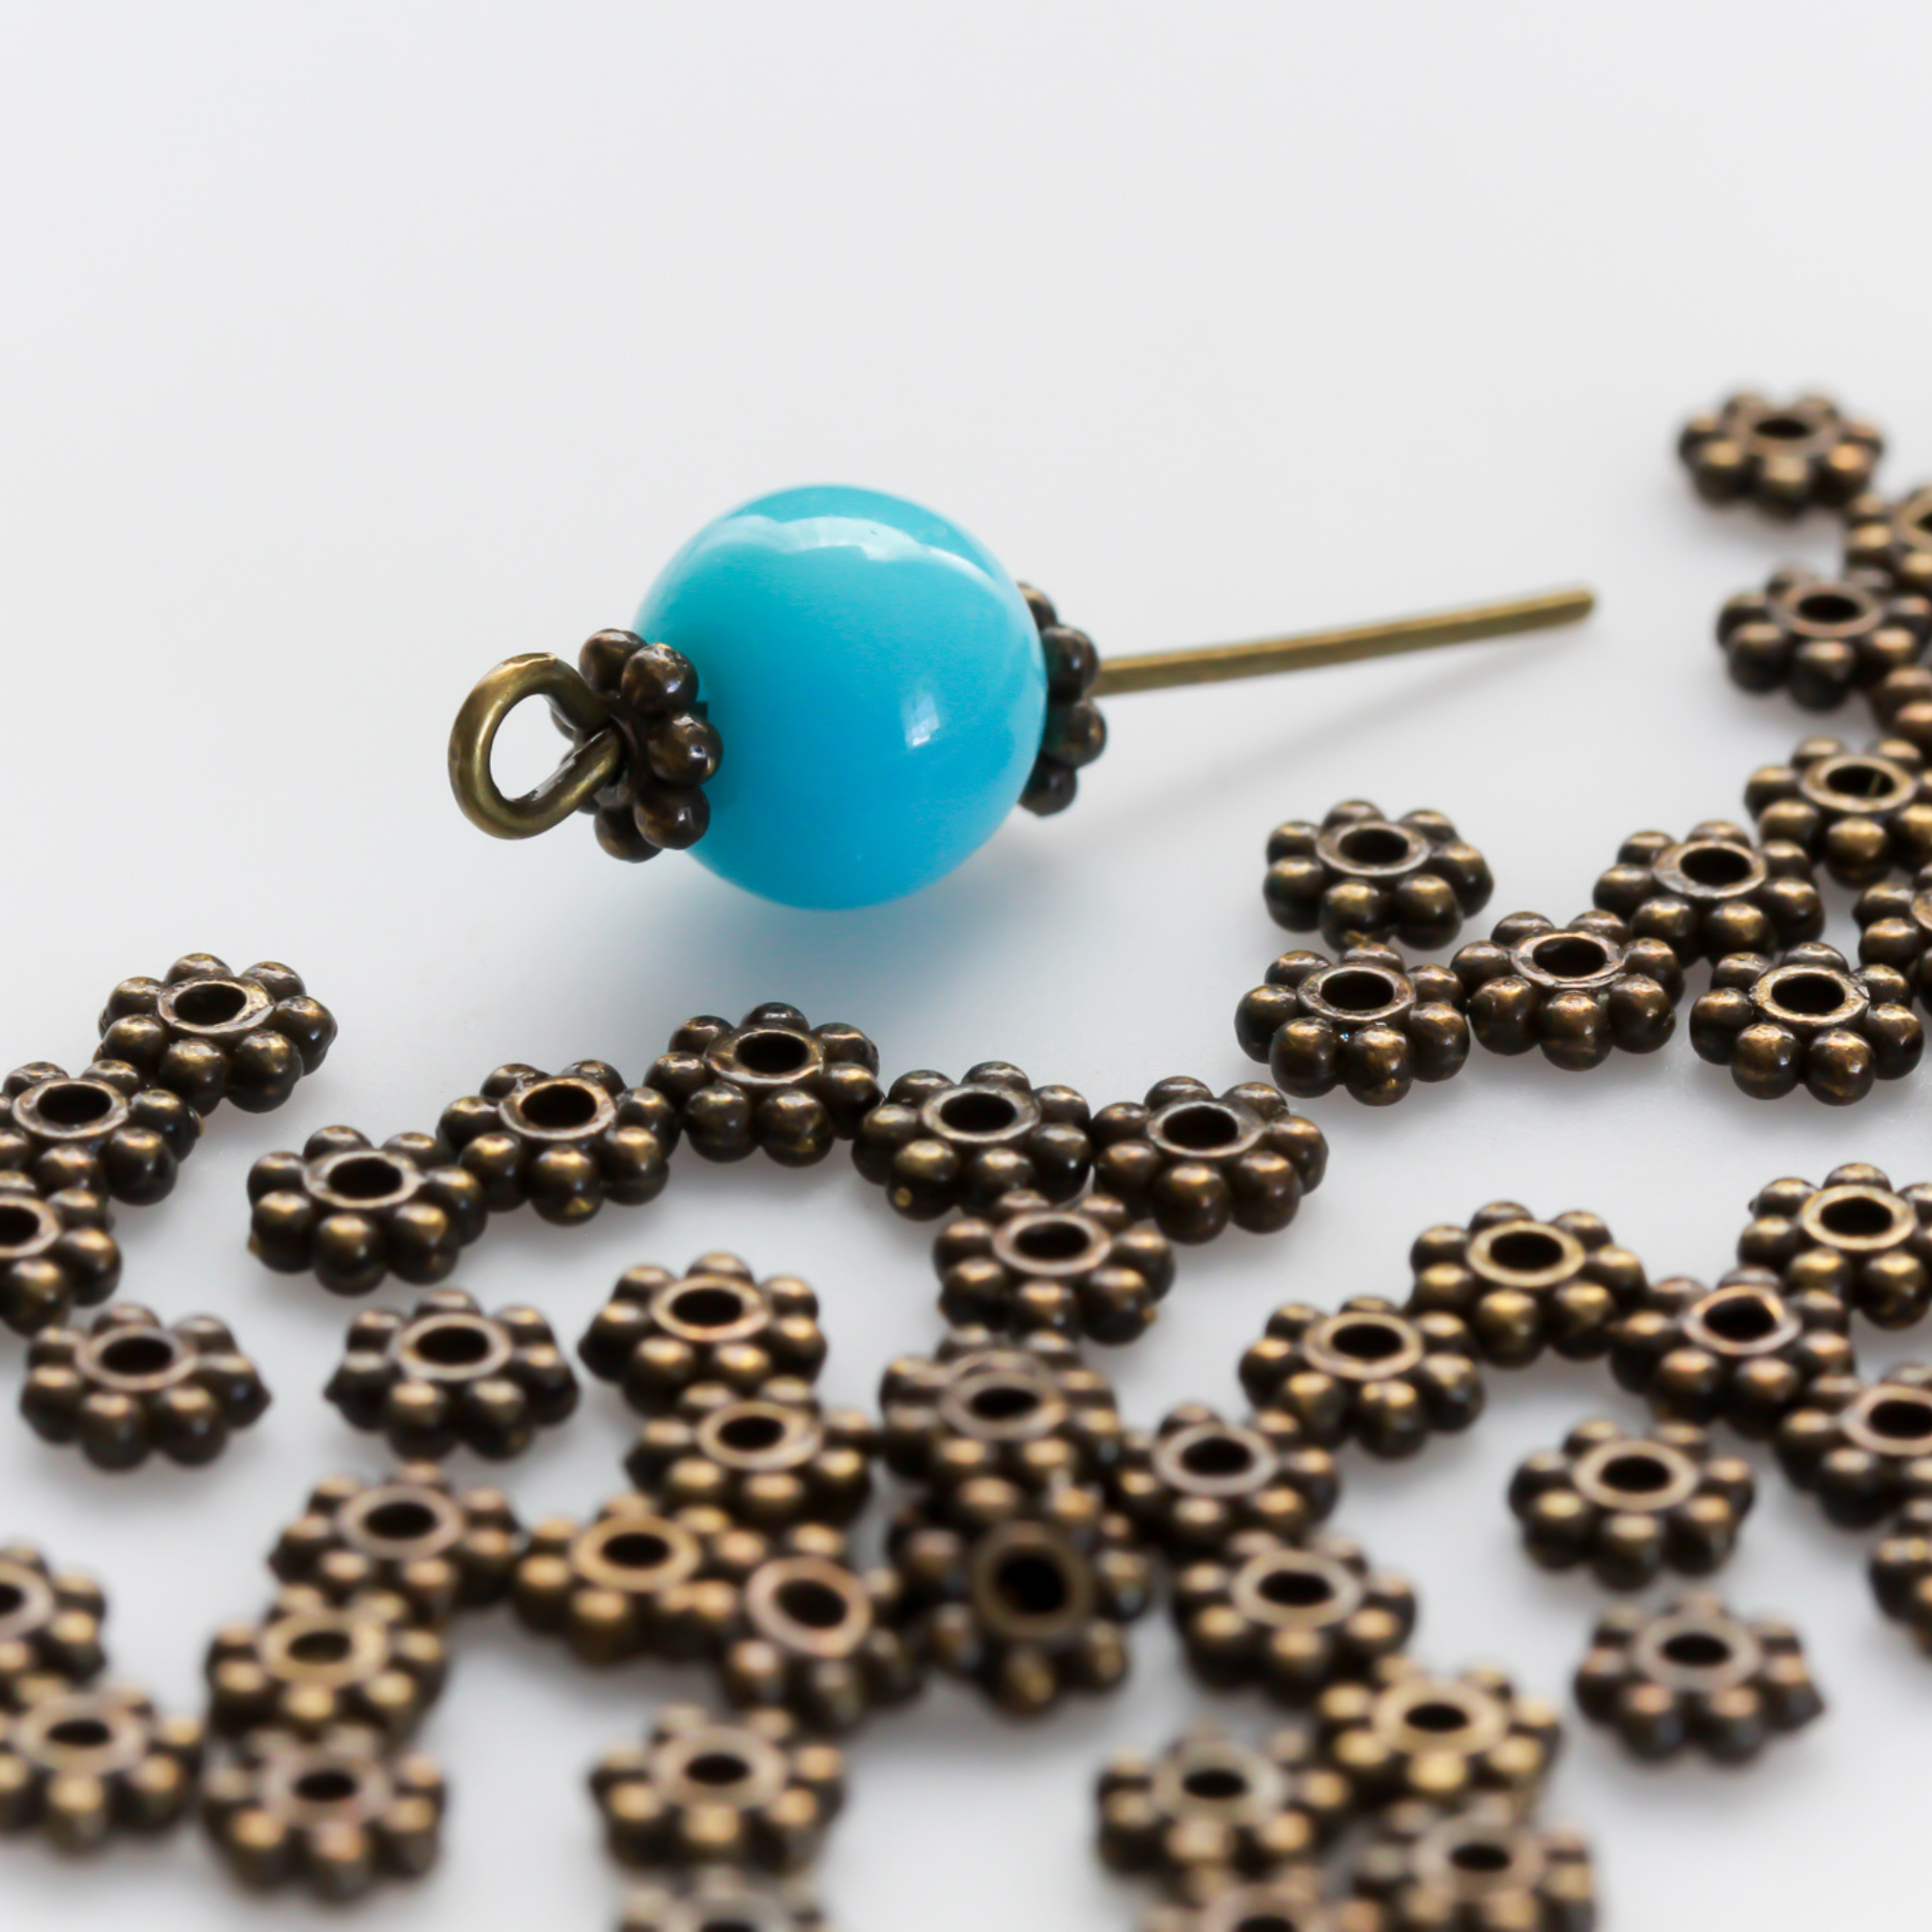  Antique Bronze Spacer Beads for Jewelry Making Small